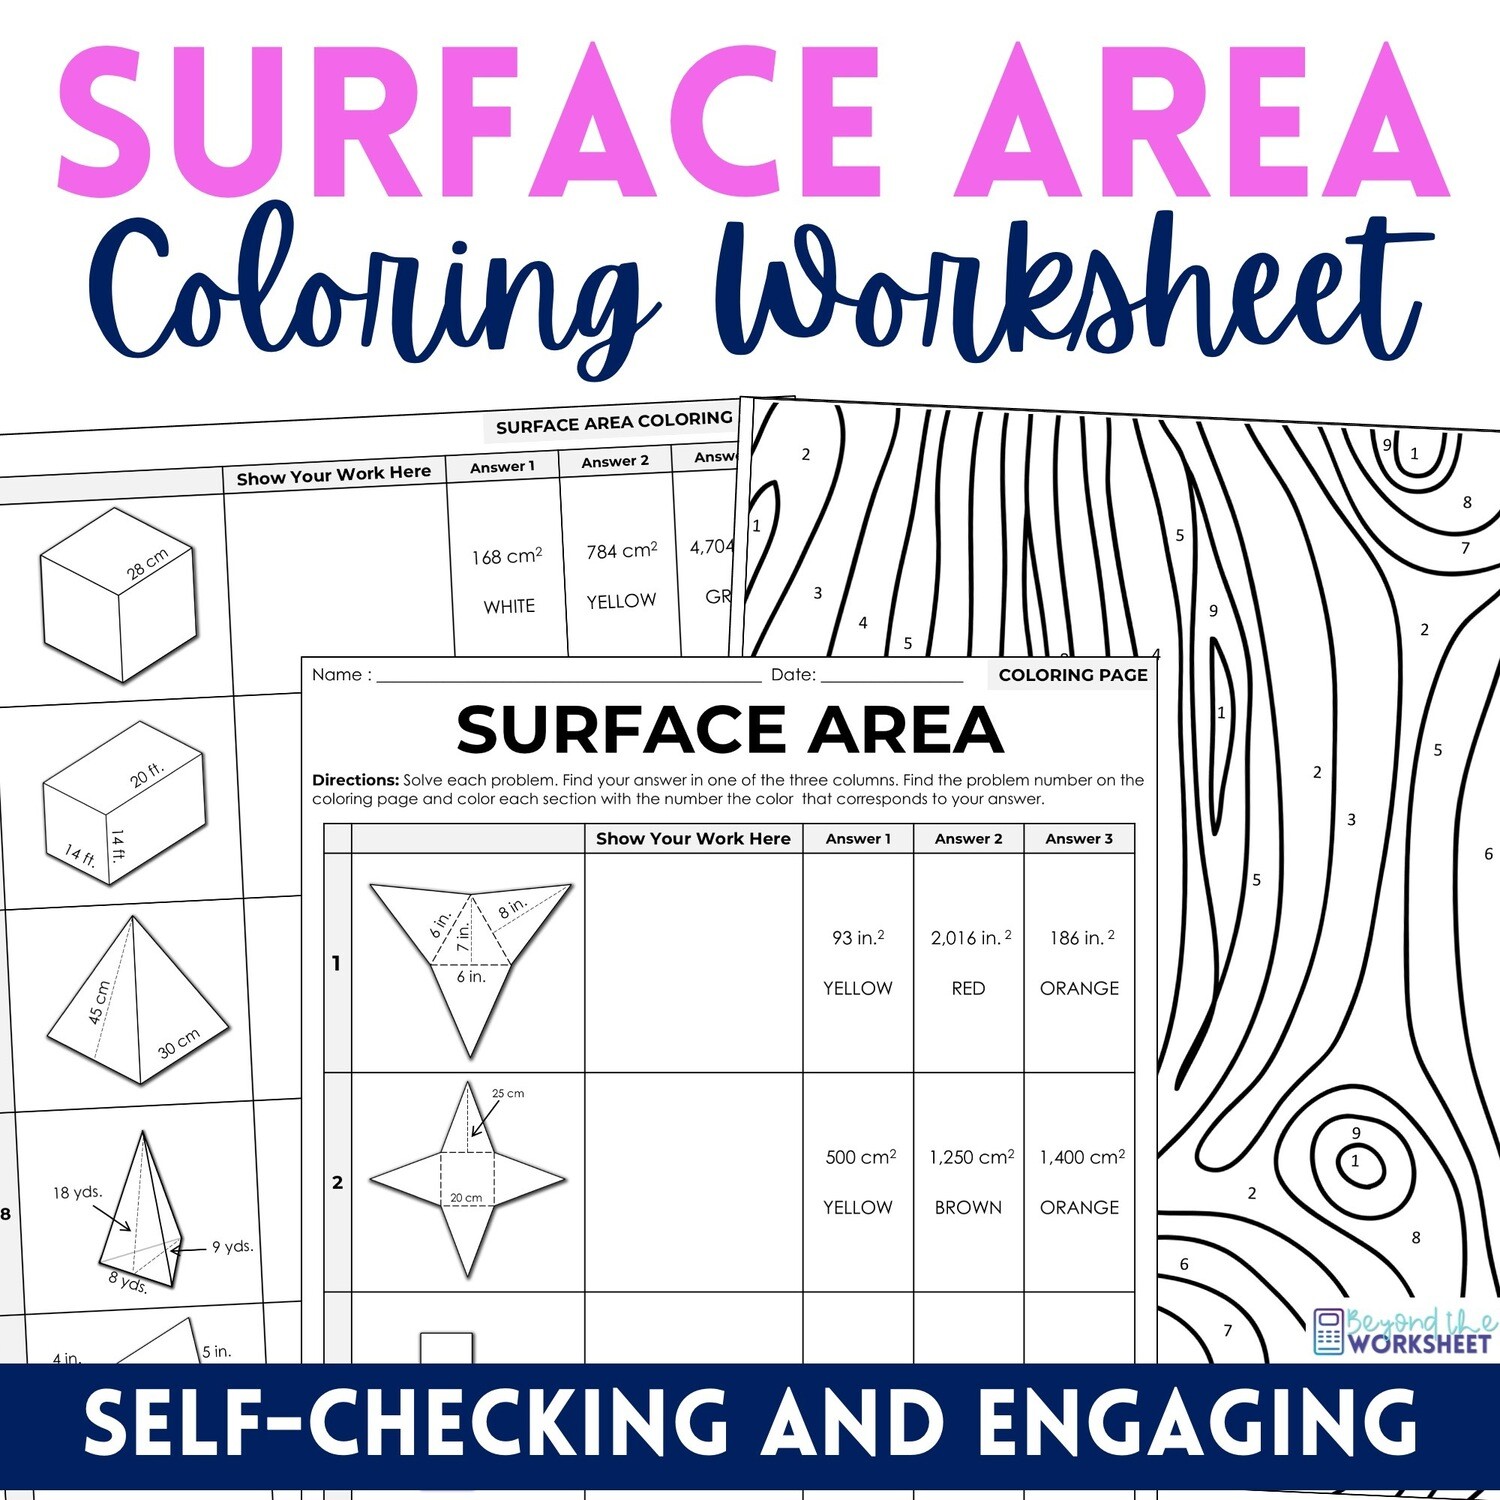 Surface Area Coloring Worksheet